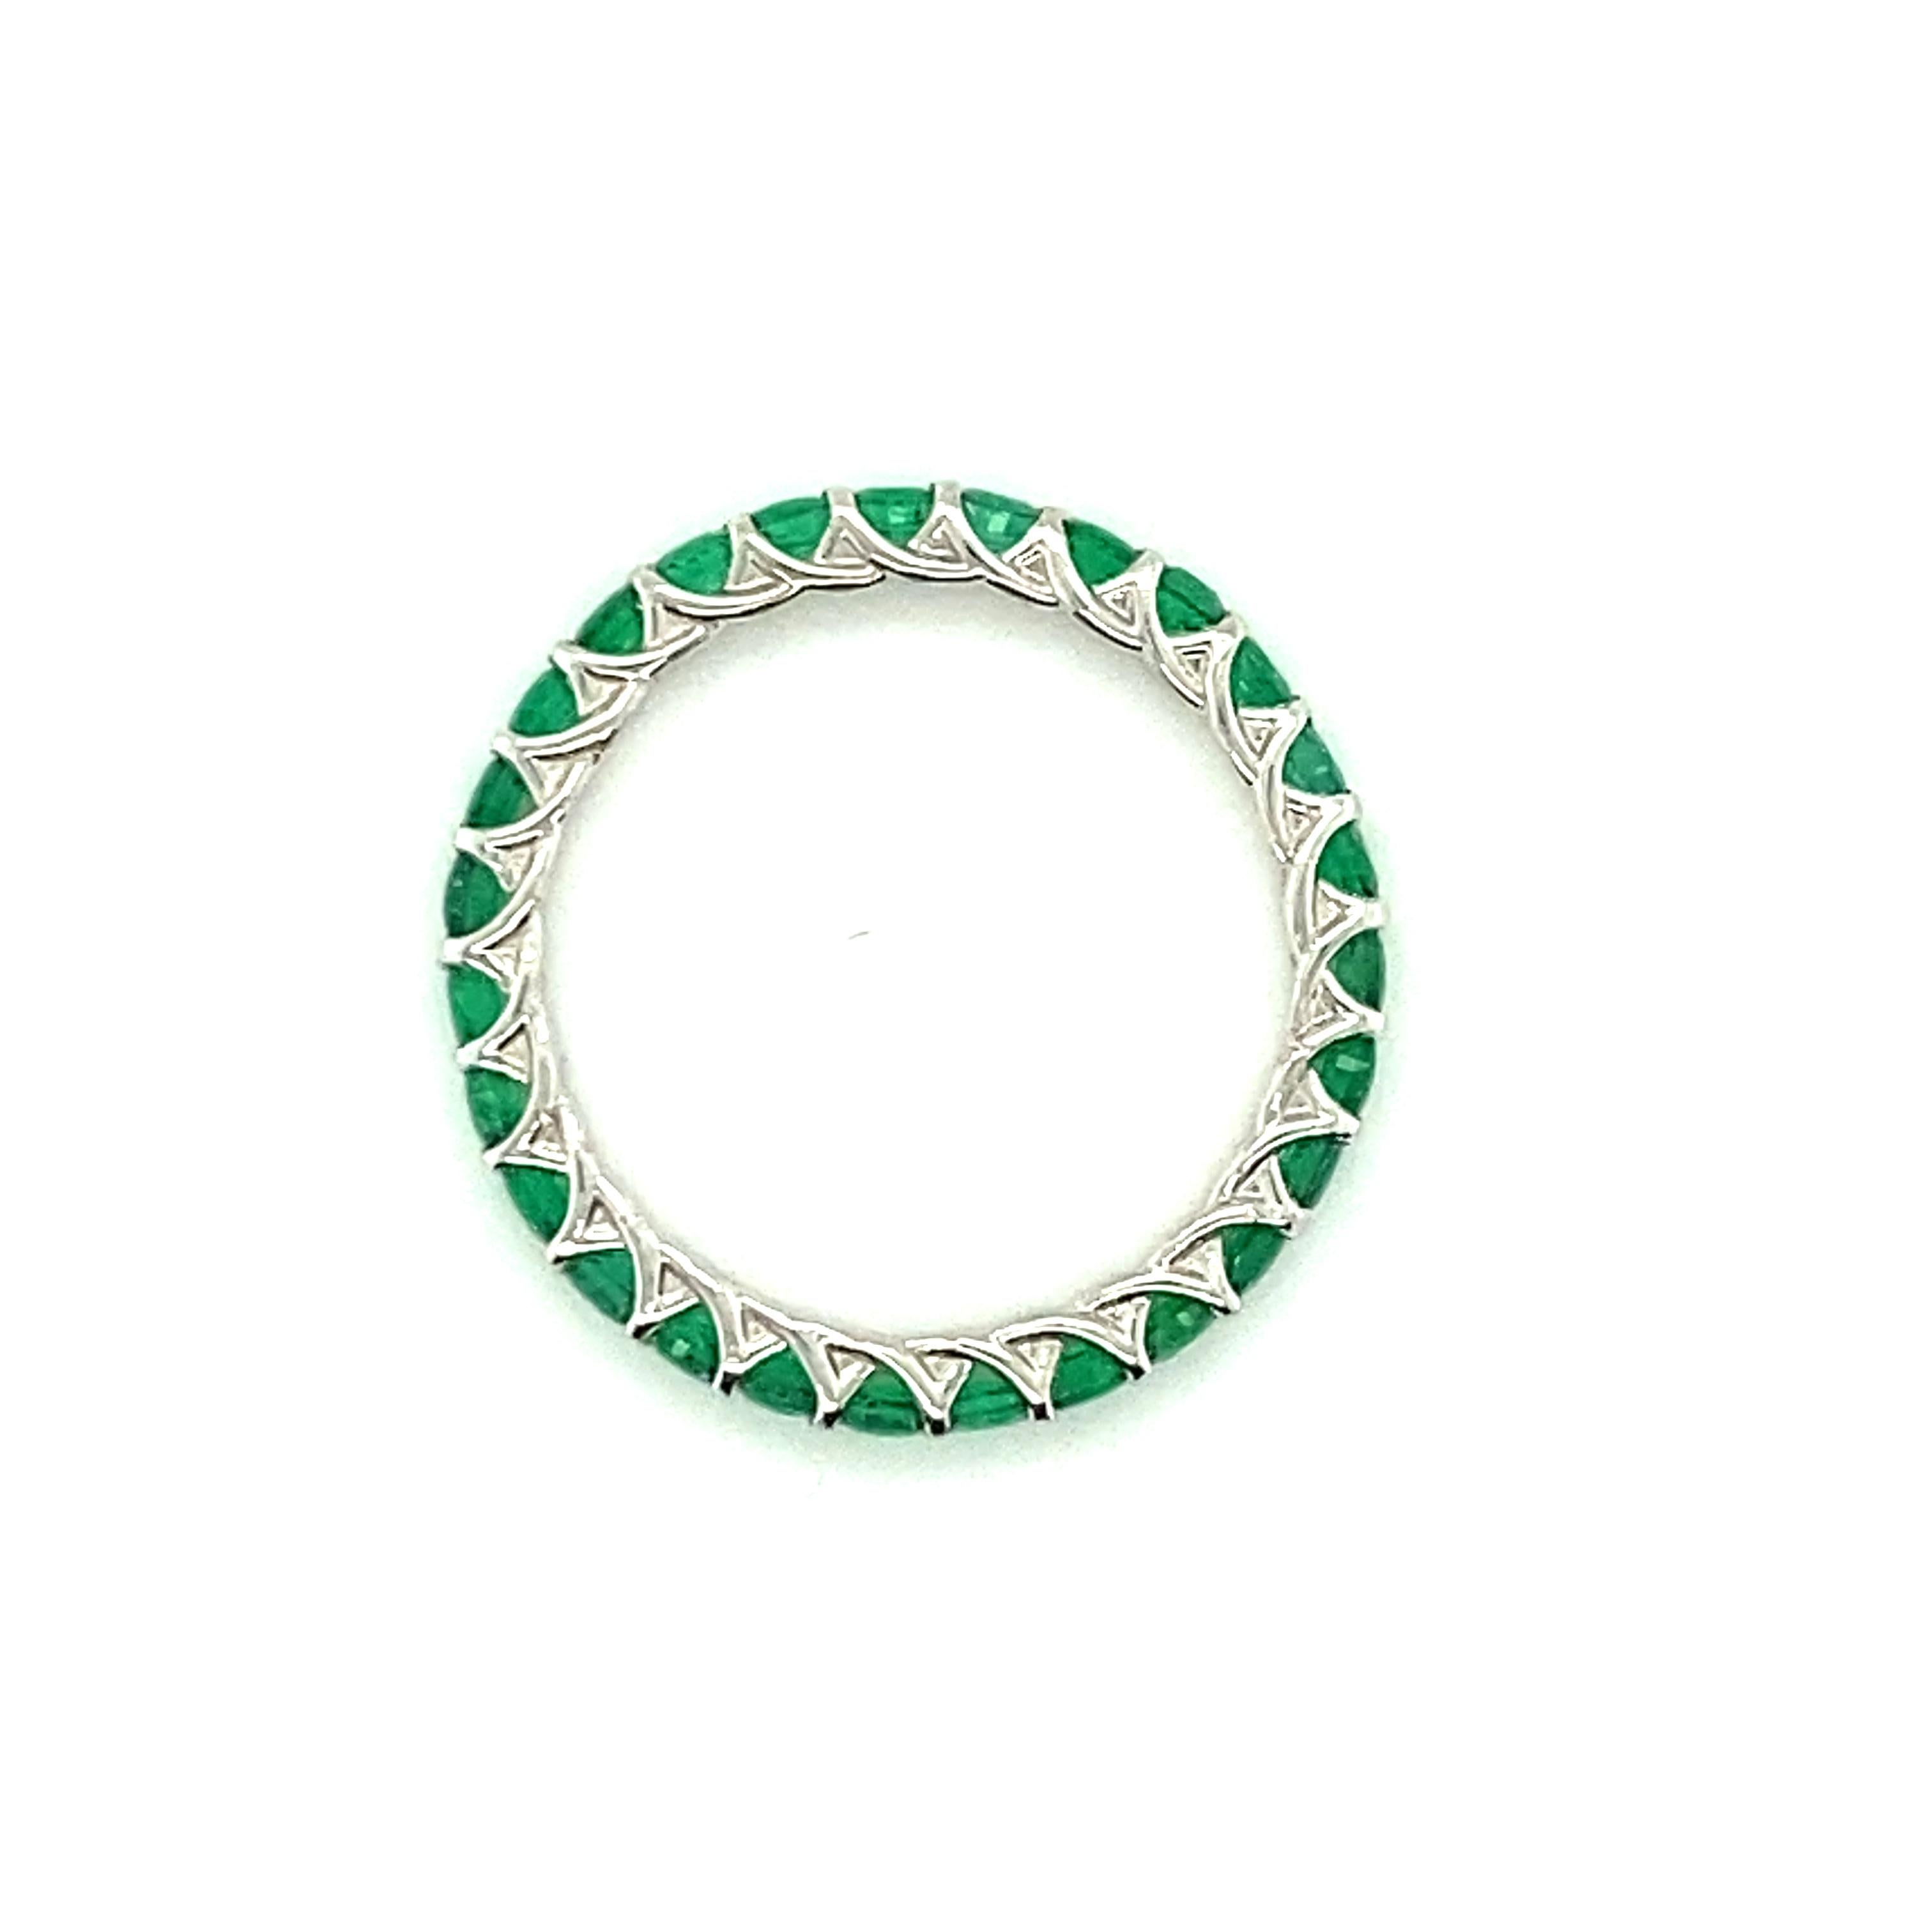 A platinum eternity band set with 27 vibrant green round brilliant-cut emeralds totaling approximately 1.25cts.  Emeralds are crisp and exceptionally clean - it is difficult to find inclusions even under 10x magnification, which makes the emeralds